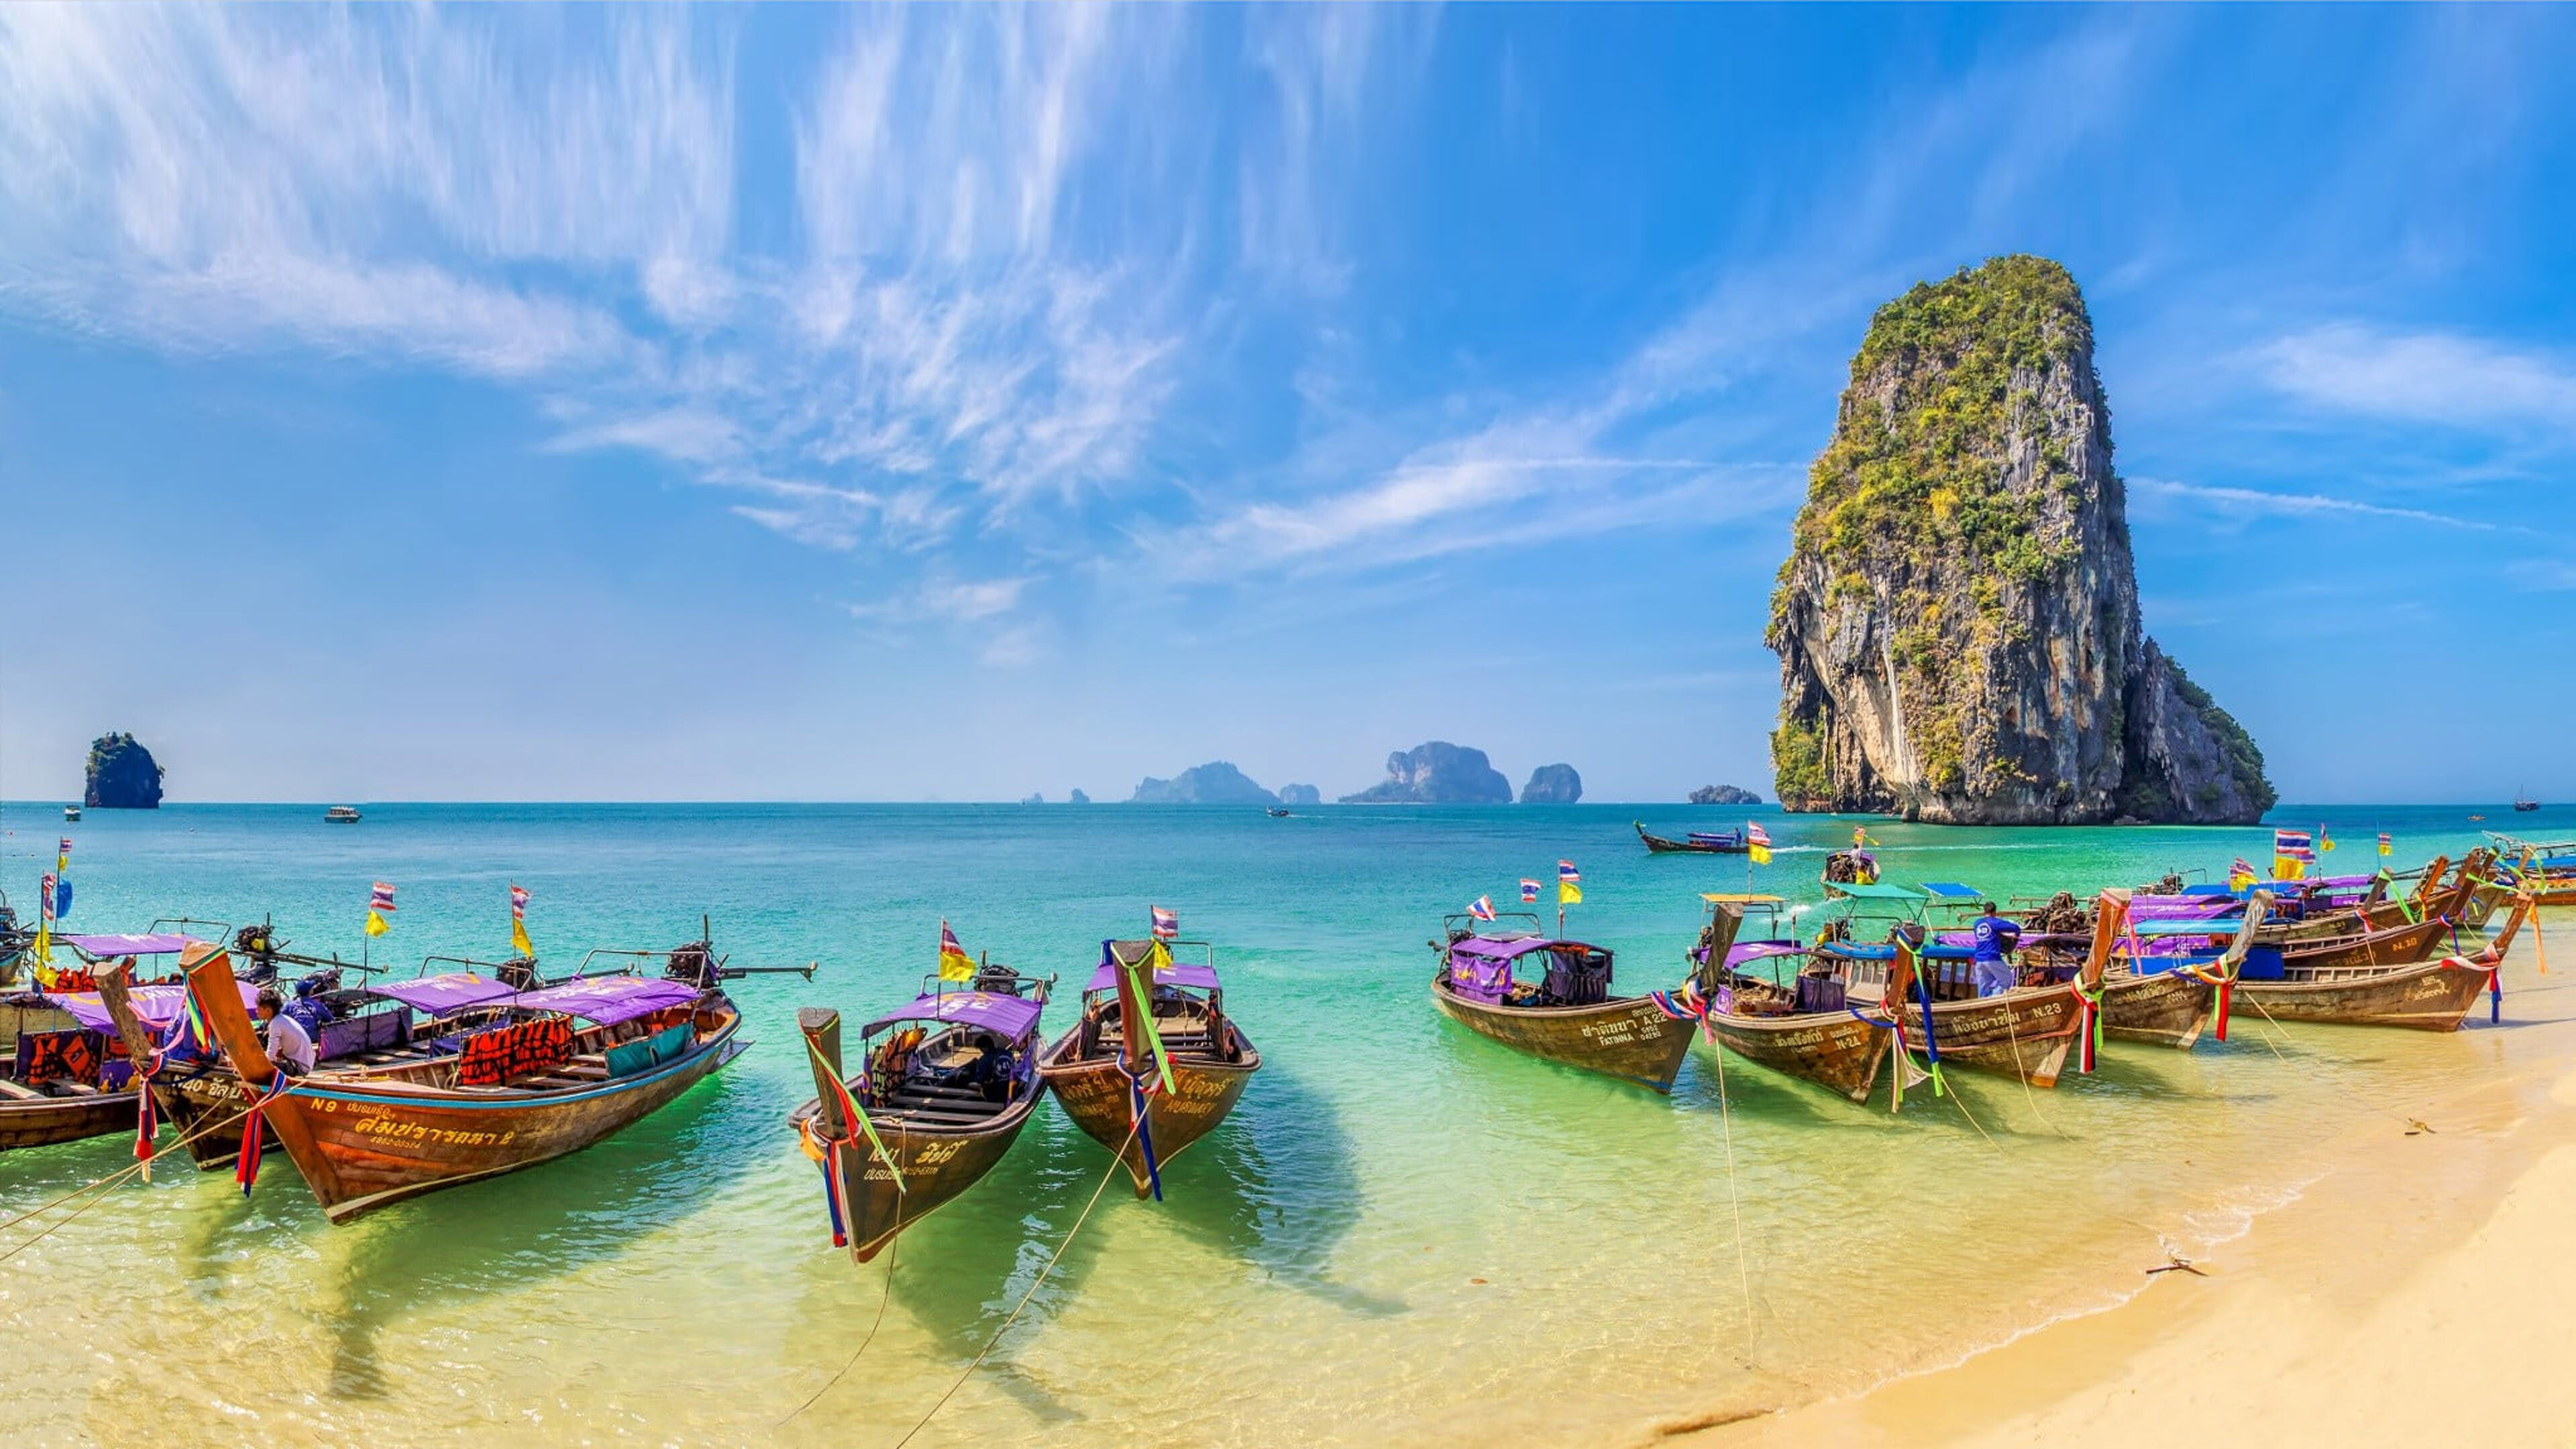 Thailand: Country In Asia, The Exotic Island Of Phuket, Beach, Sand, Limestone. 3840x2160 4K Wallpaper.